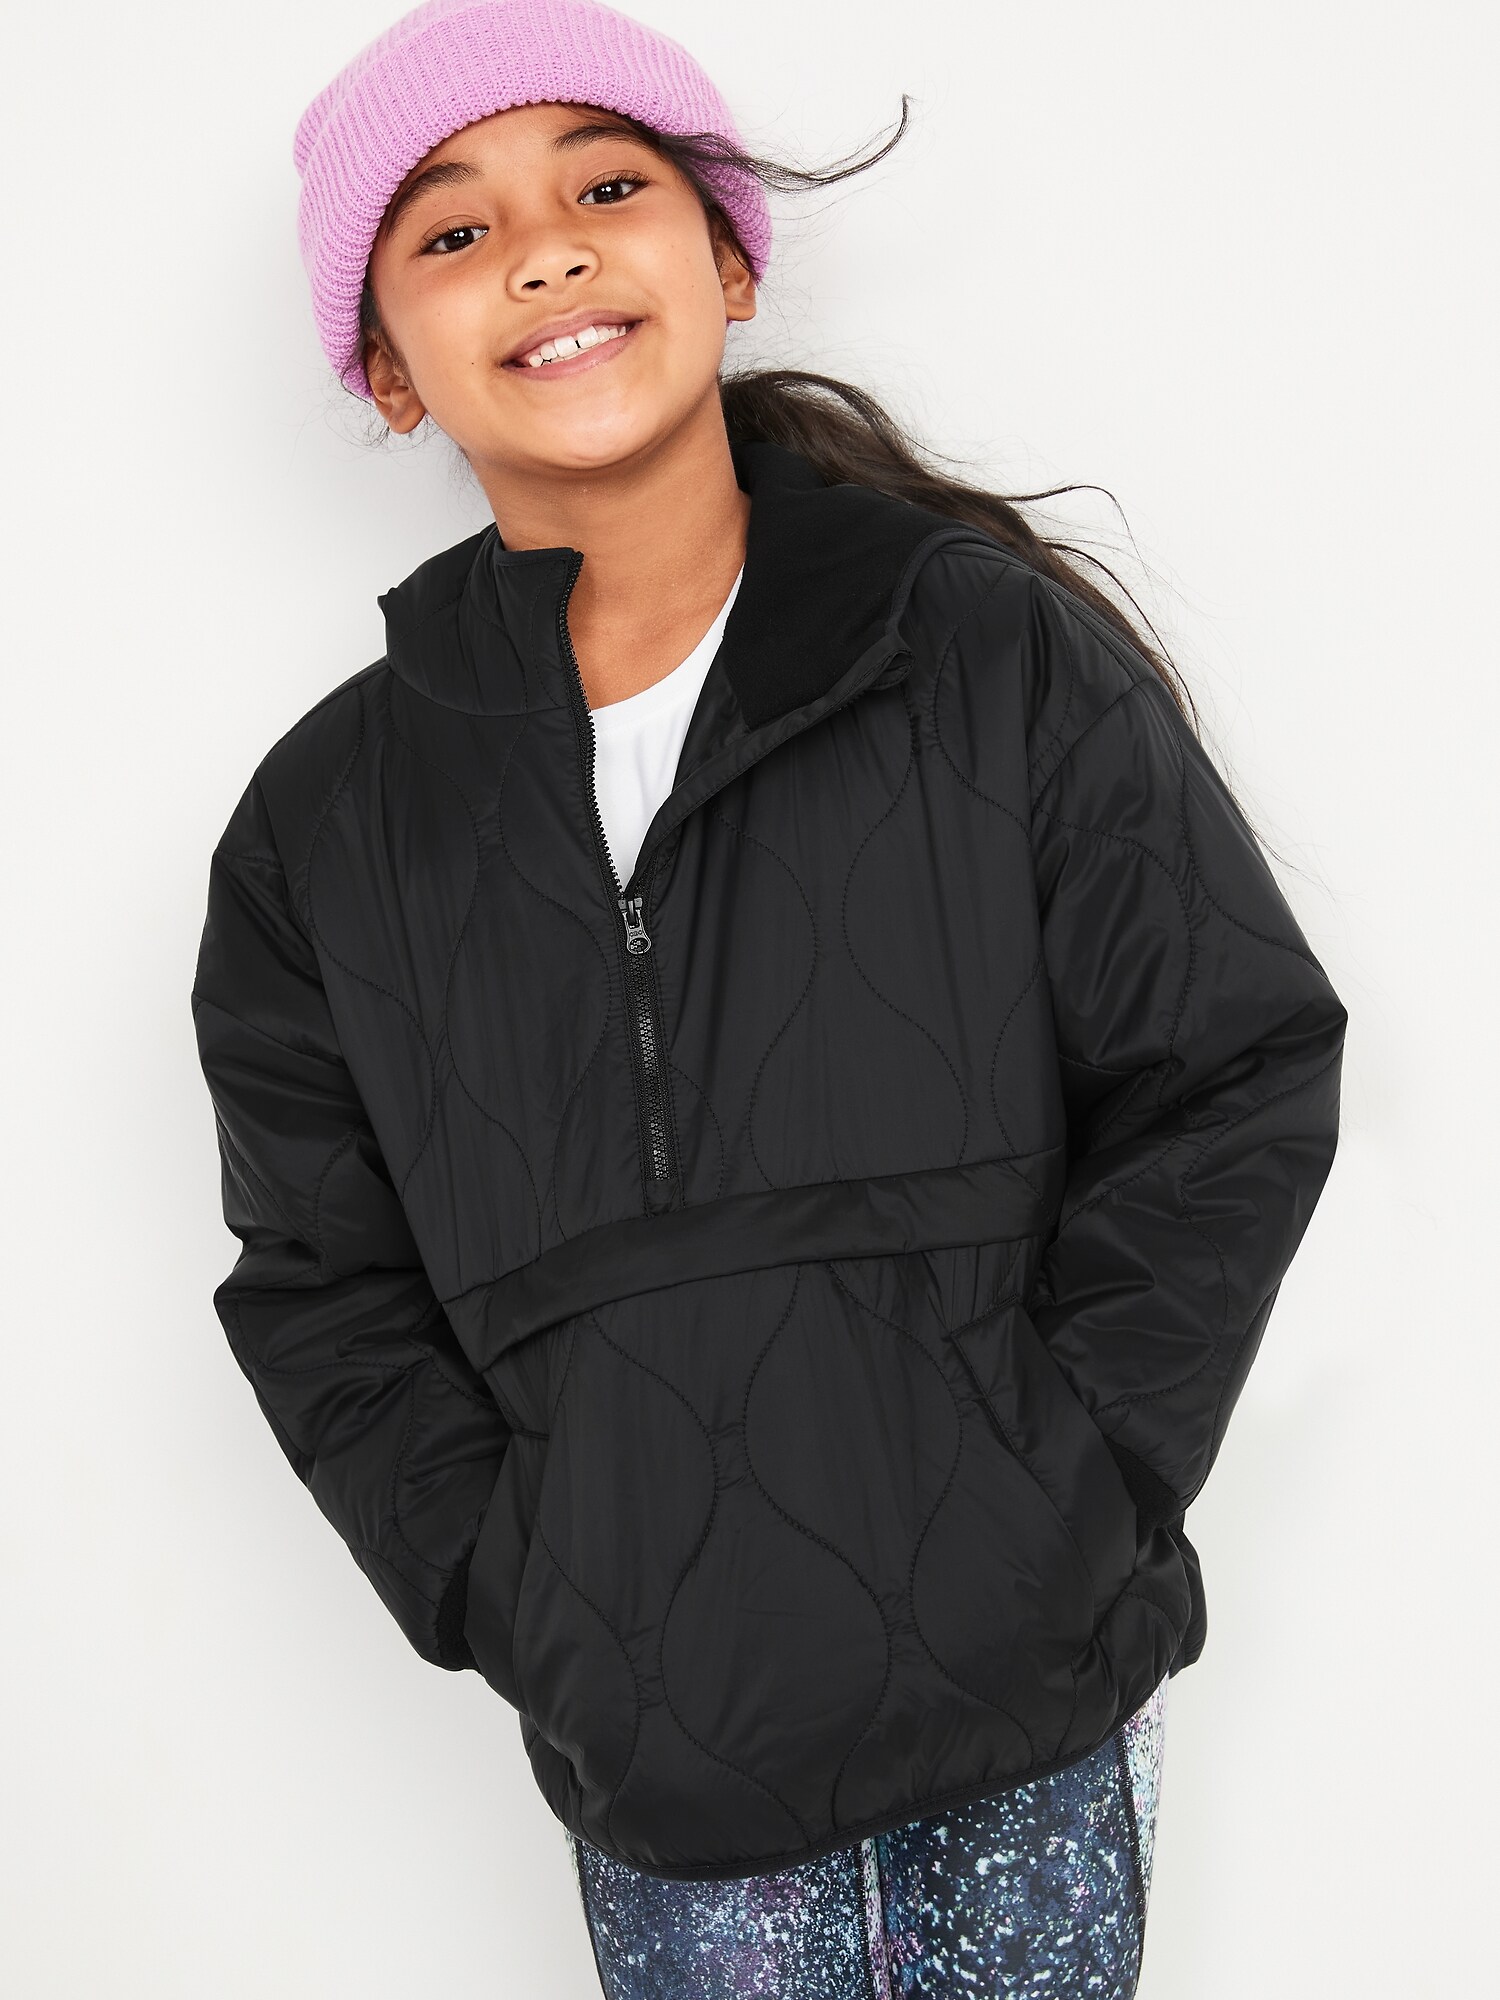 Buy half jacket for girls winter stylish with cap in India @ Limeroad-calidas.vn